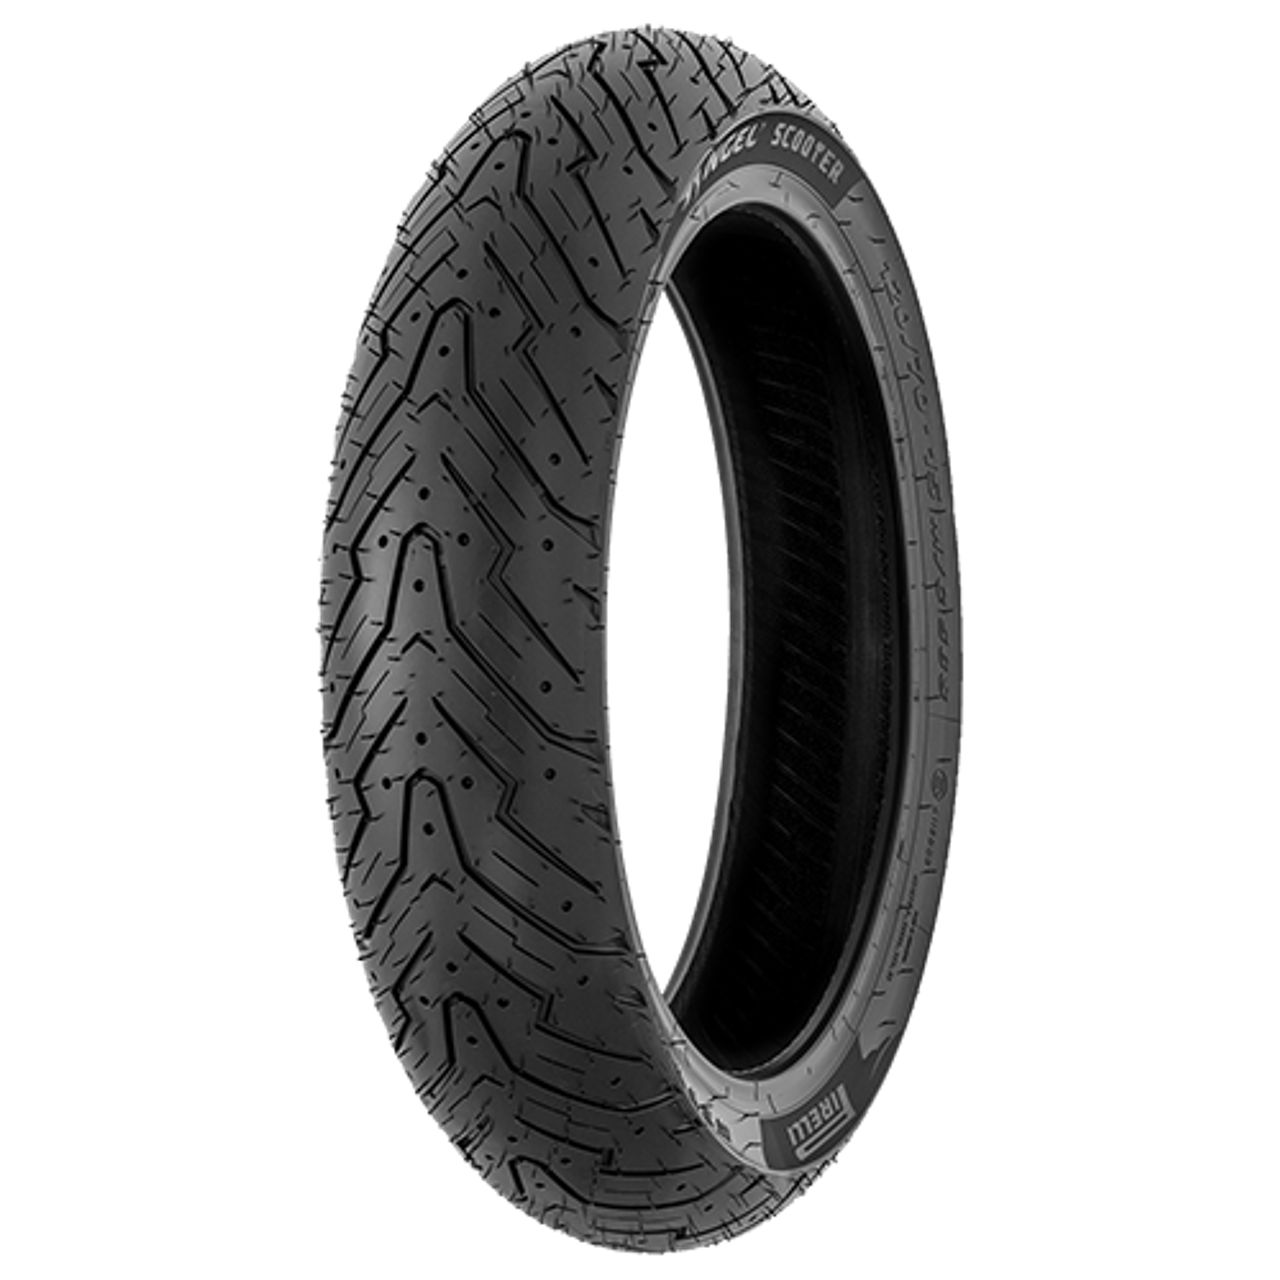 PIRELLI ANGEL SCOOTER 110/70 - 13 M/C TL 48S FRONT